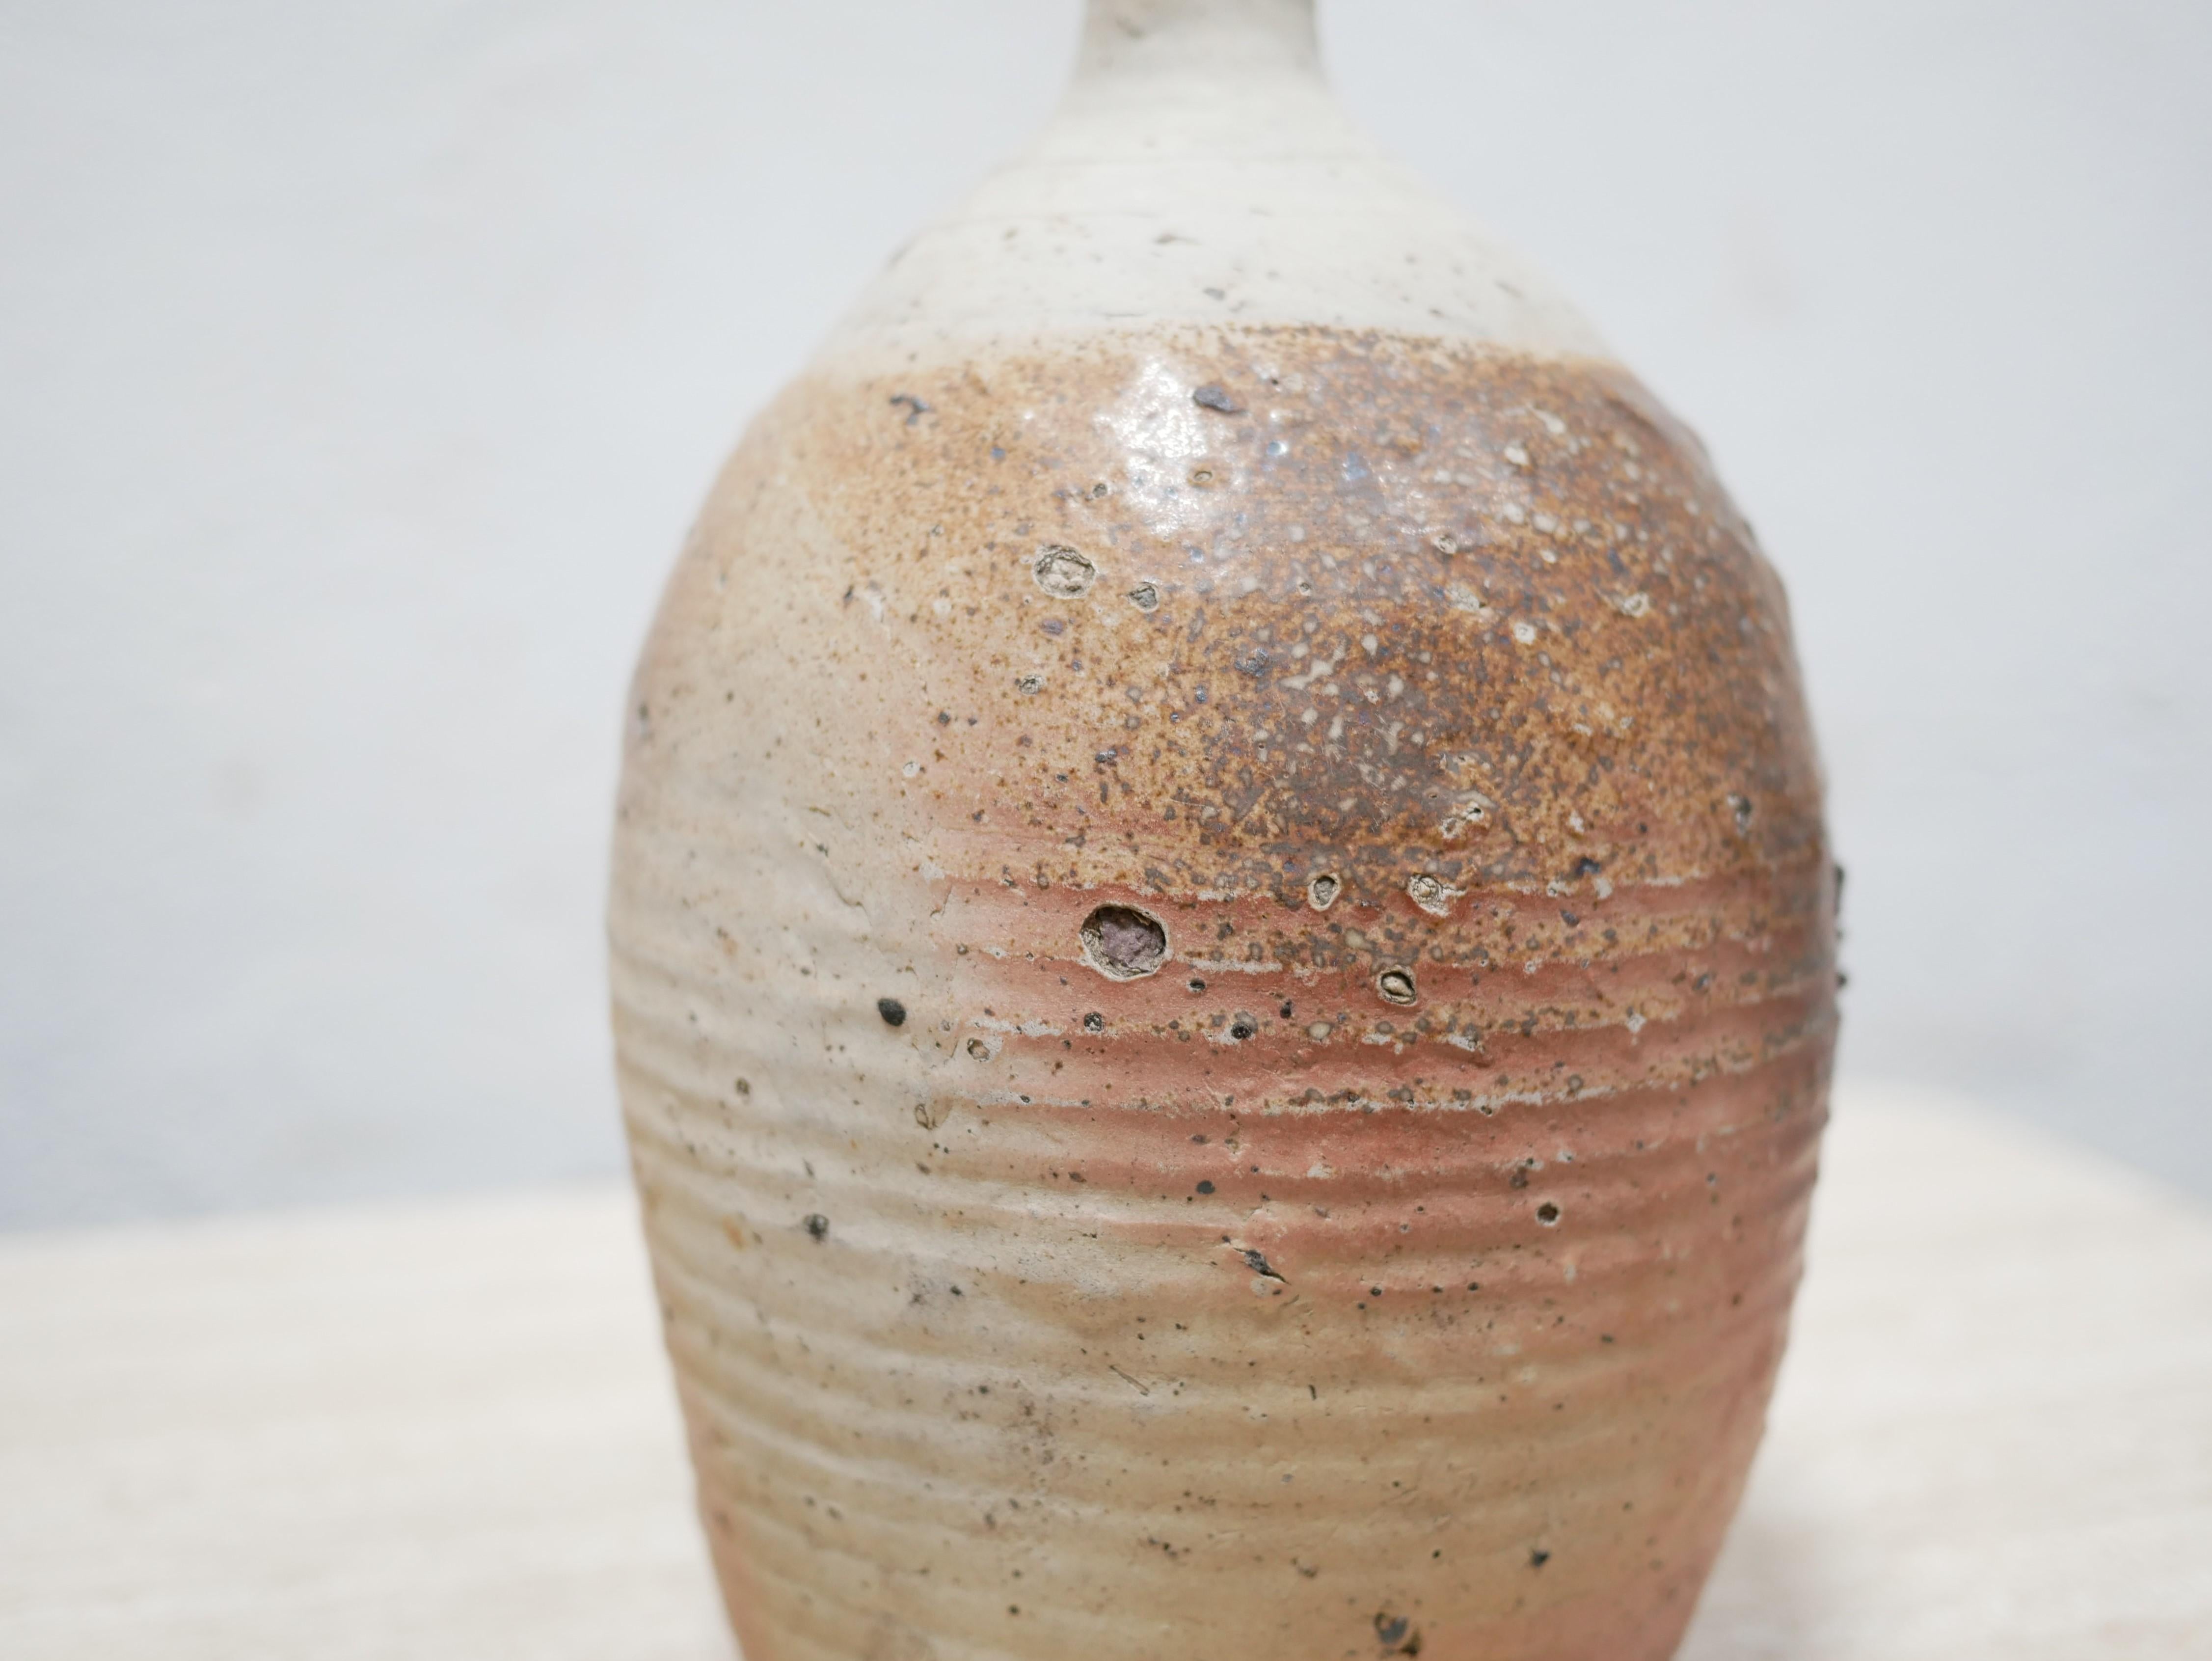 Glazed terracotta jar from the 60s.

With its modern shape and mineral hue, this ceramic will be perfect in a natural, refined and delicate decoration.
We simply imagine it placed on a shelf or piece of furniture, adorned with a few dried flowers